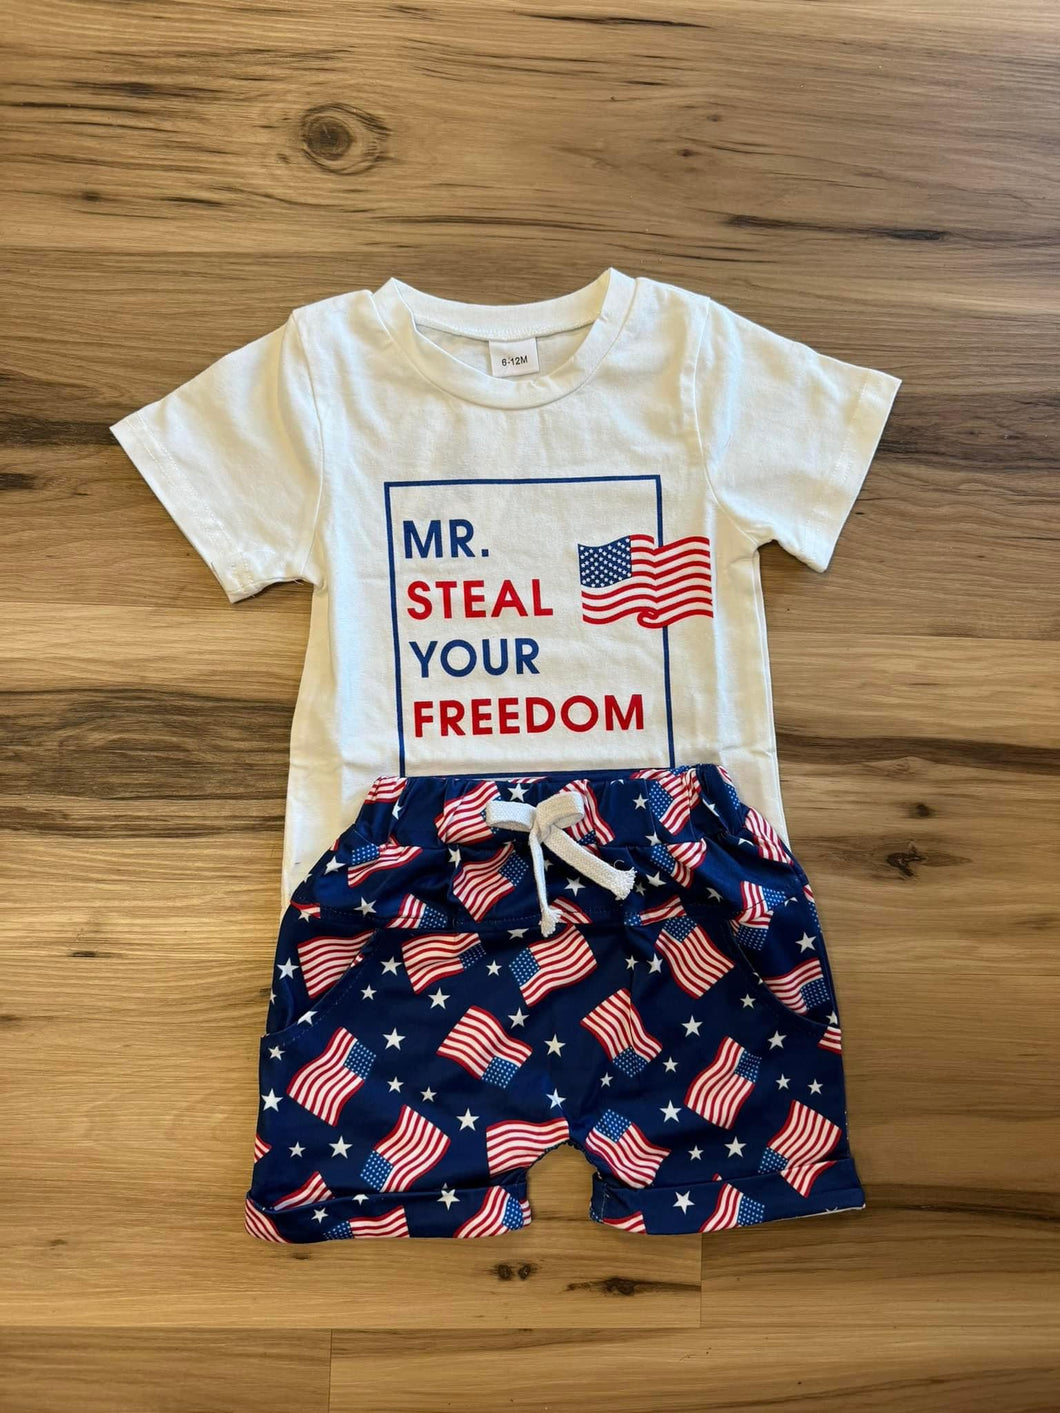 Mr. Steal your freedom